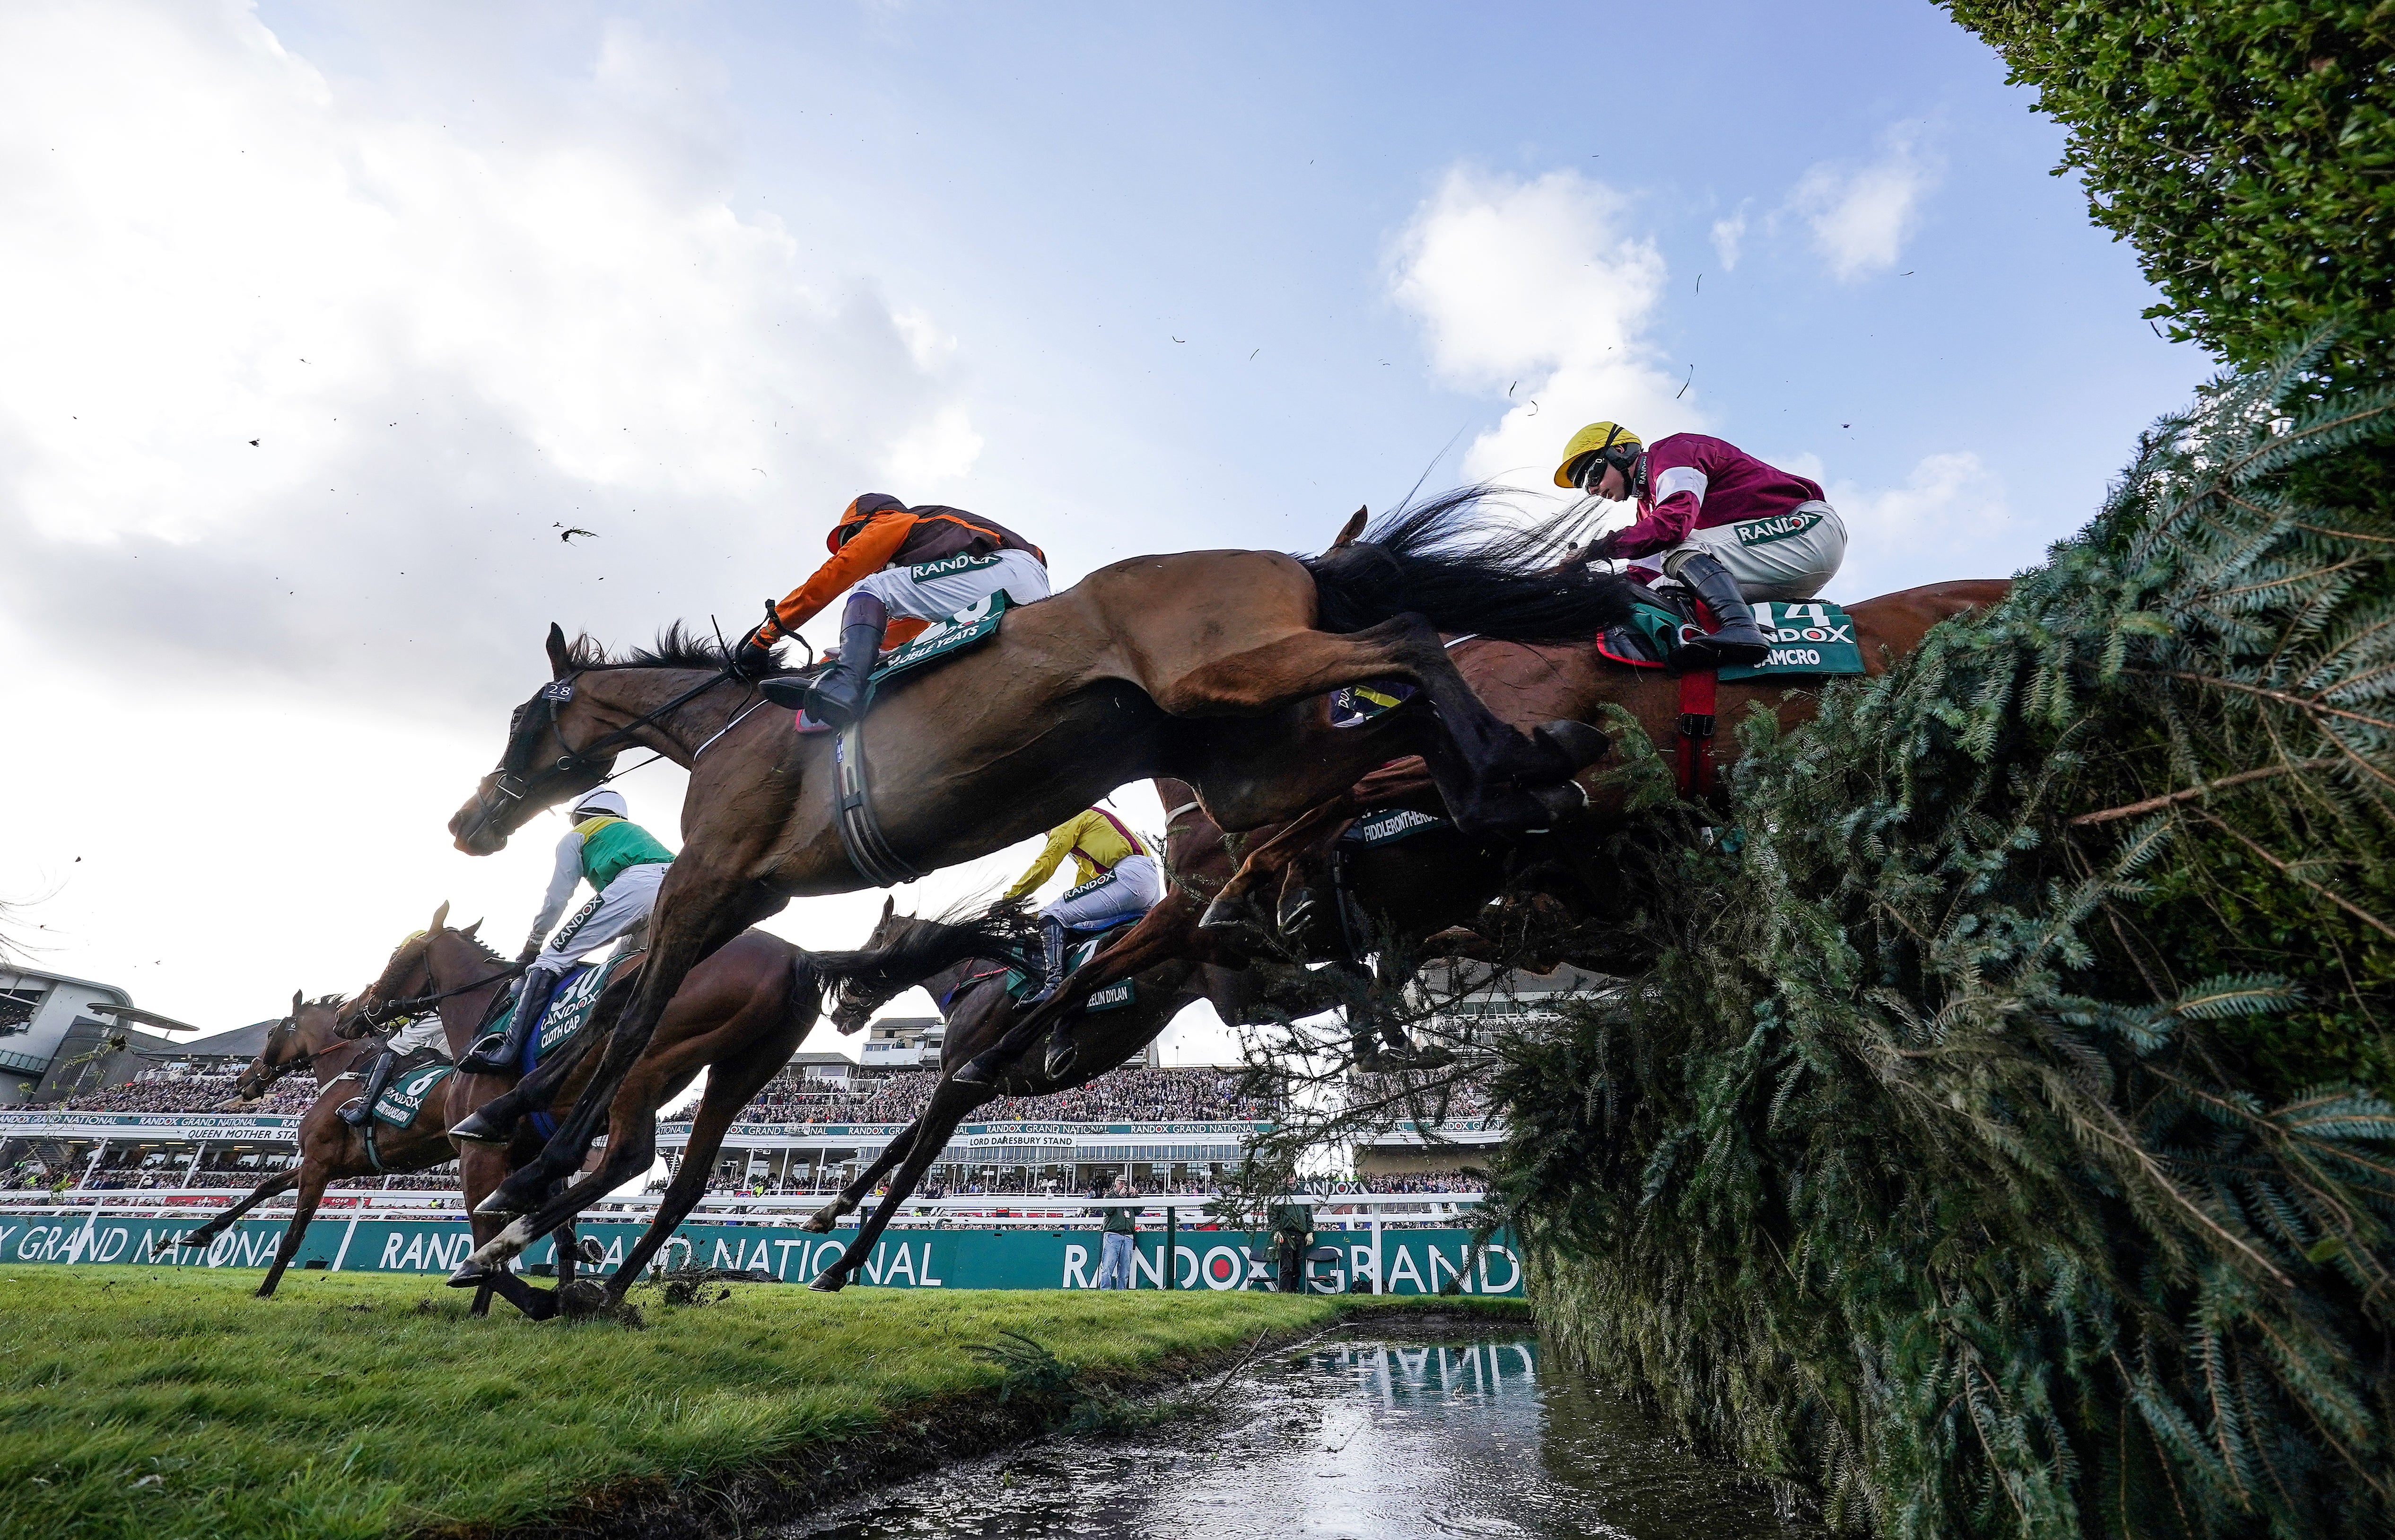 Noble Yeats, a 50-1 outsider ridden by Sam Waley-Cohen, at the water-jump on their way to victory in the Grand National at Aintree (David Davies/PA)